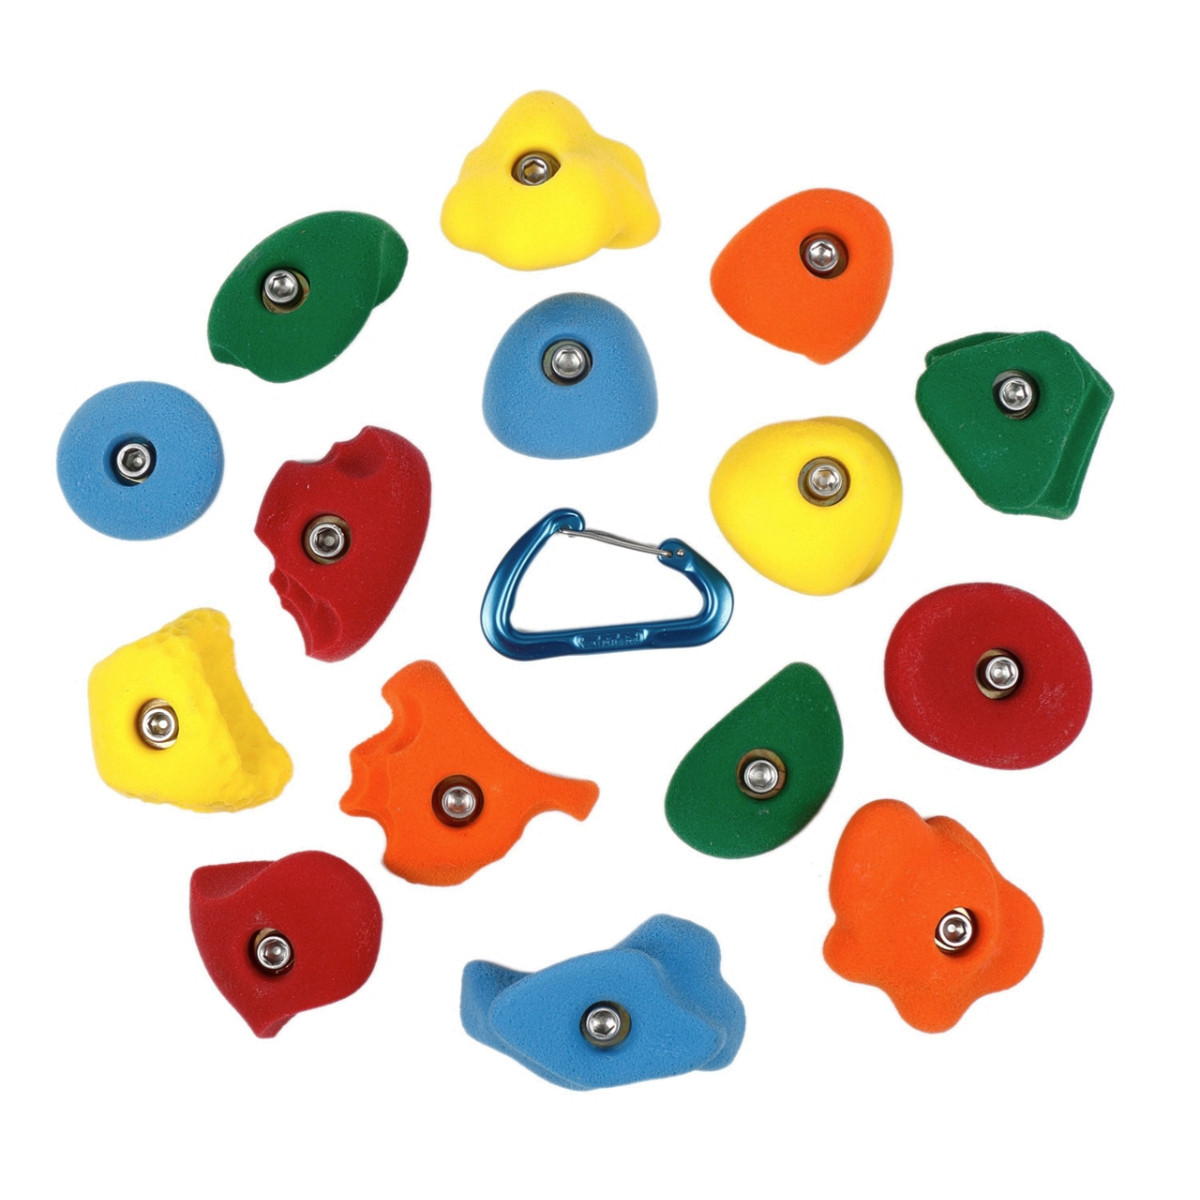 Atomik Climbing Holds - Bolt-Ons (Set of 15) - Mixed Bright Colors